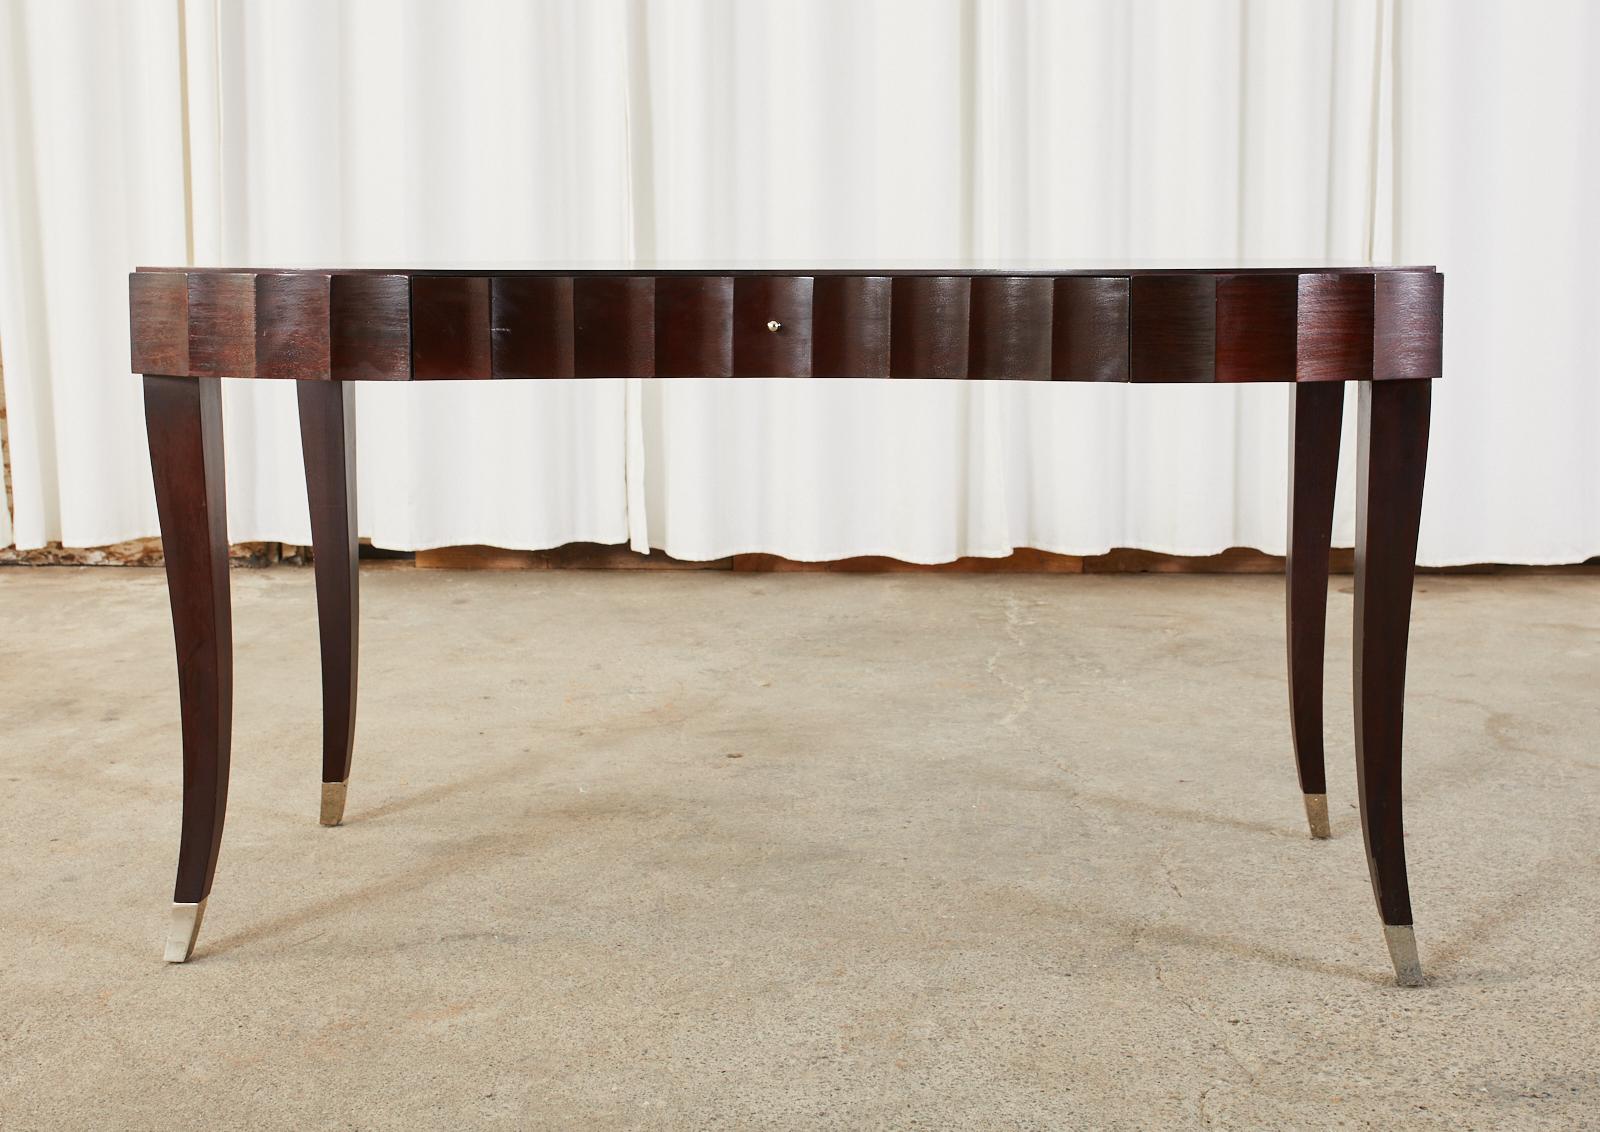 Glamorous Art Deco style writing table or desk designed by Barbara Barry for Baker Furniture. Crafted from oak hardwood featuring a sleek case with dramatic scalloped edges on each side and a serpentine shaped front. There is a single storage drawer